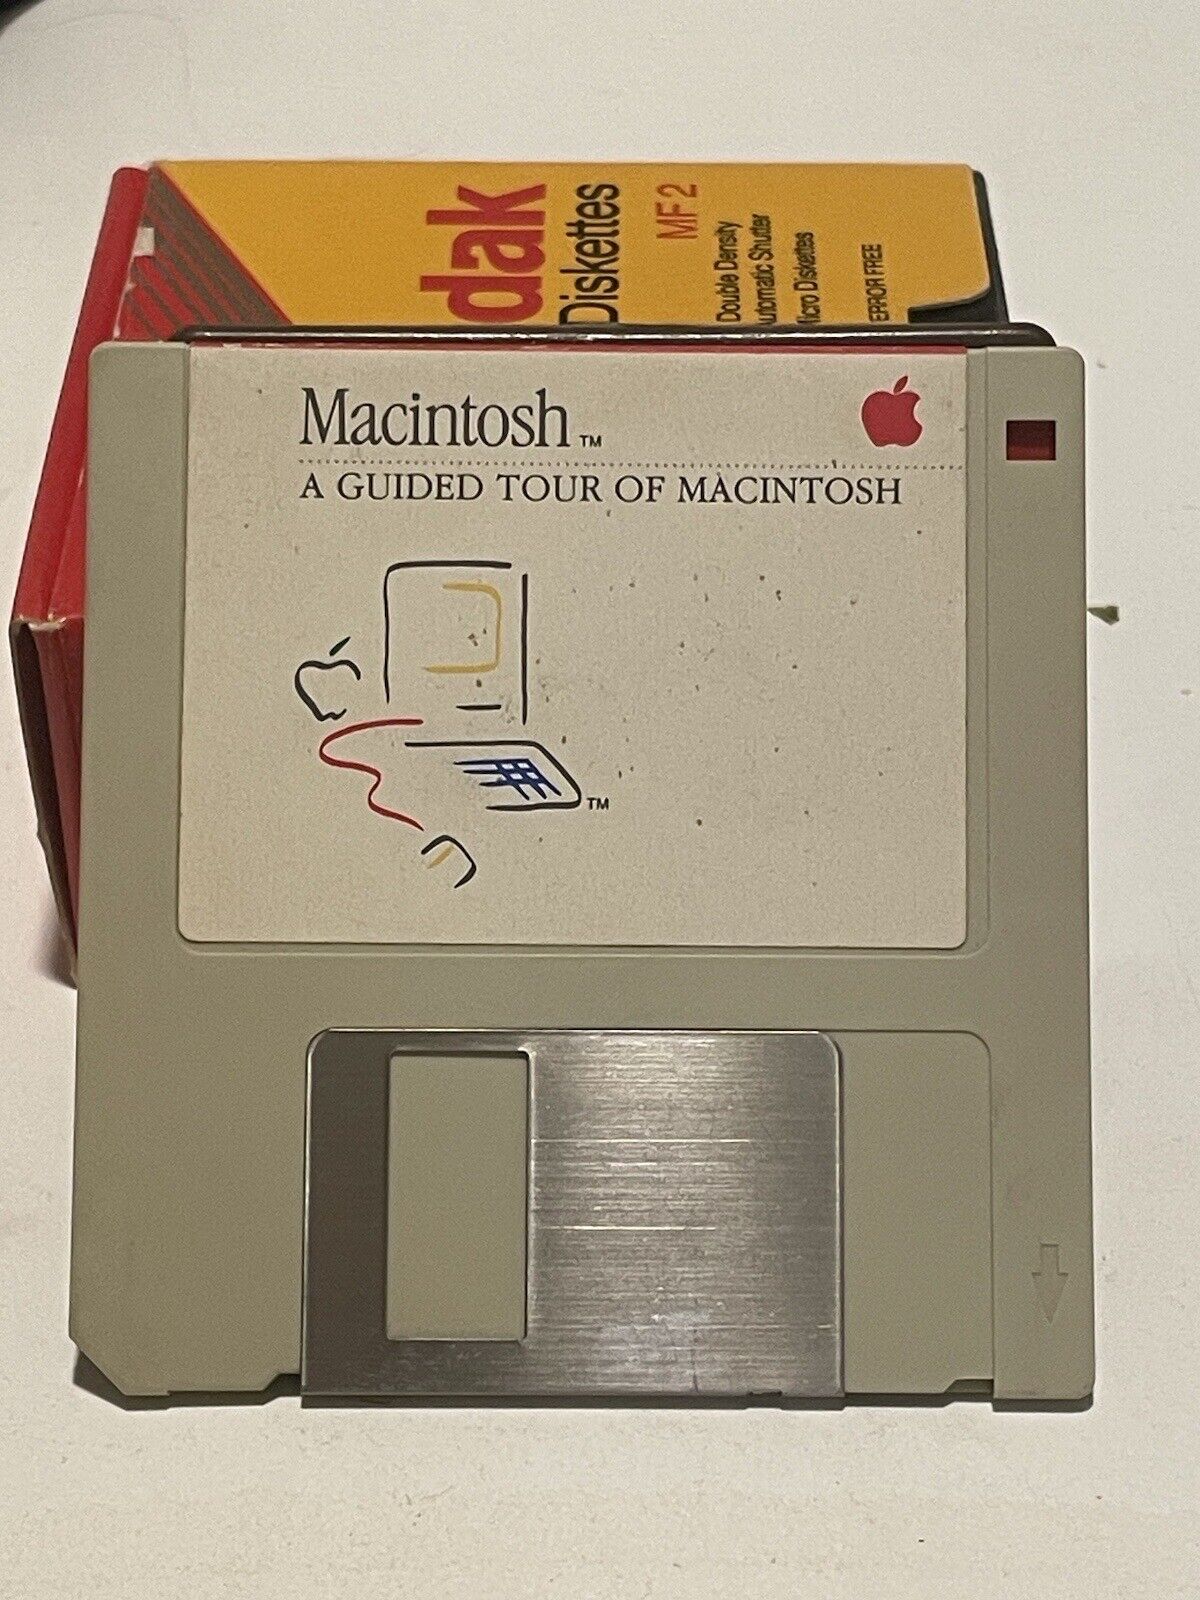 Apple Macintosh Diskette 1984 A Guided Tour of Macintosh